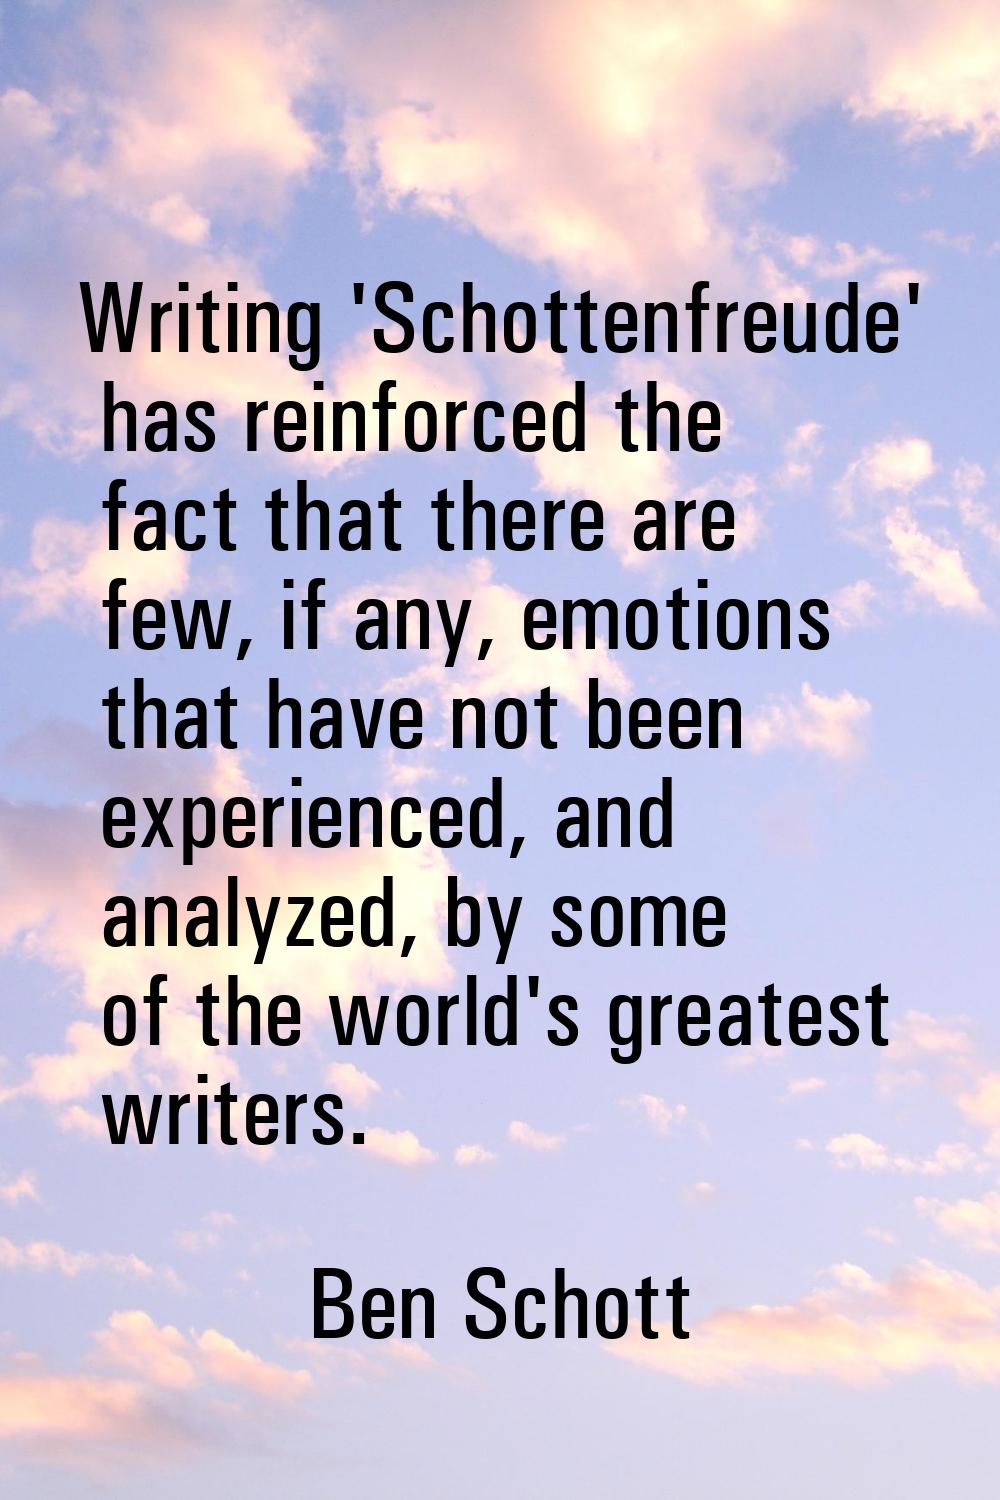 Writing 'Schottenfreude' has reinforced the fact that there are few, if any, emotions that have not